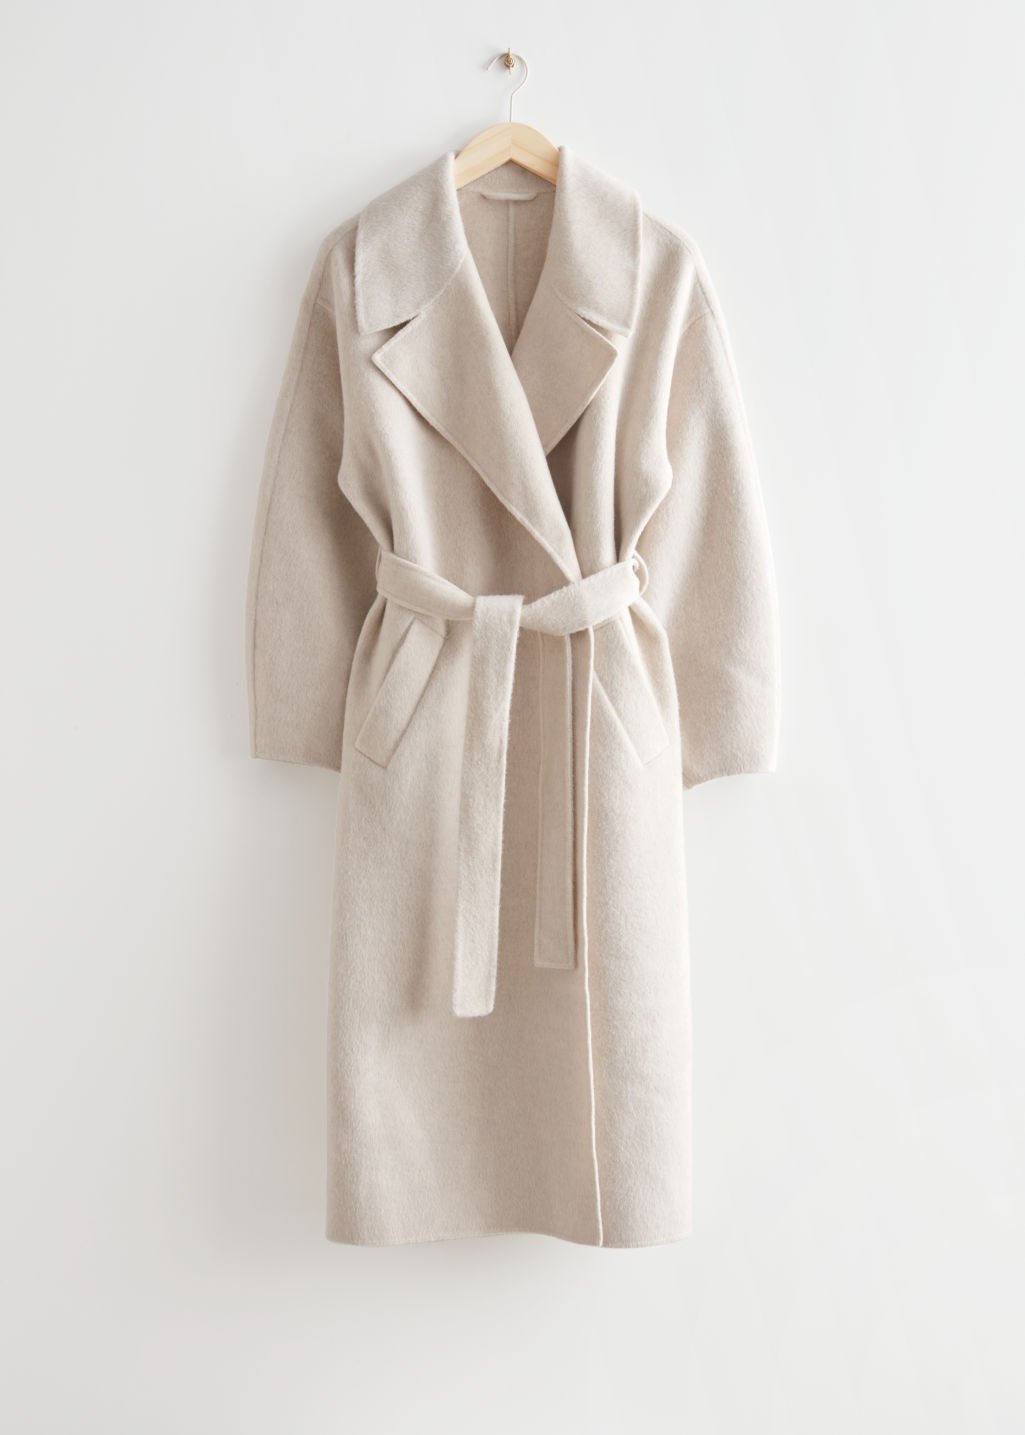 ​& Other Stories Oversized Wool Coat in Oatmeal